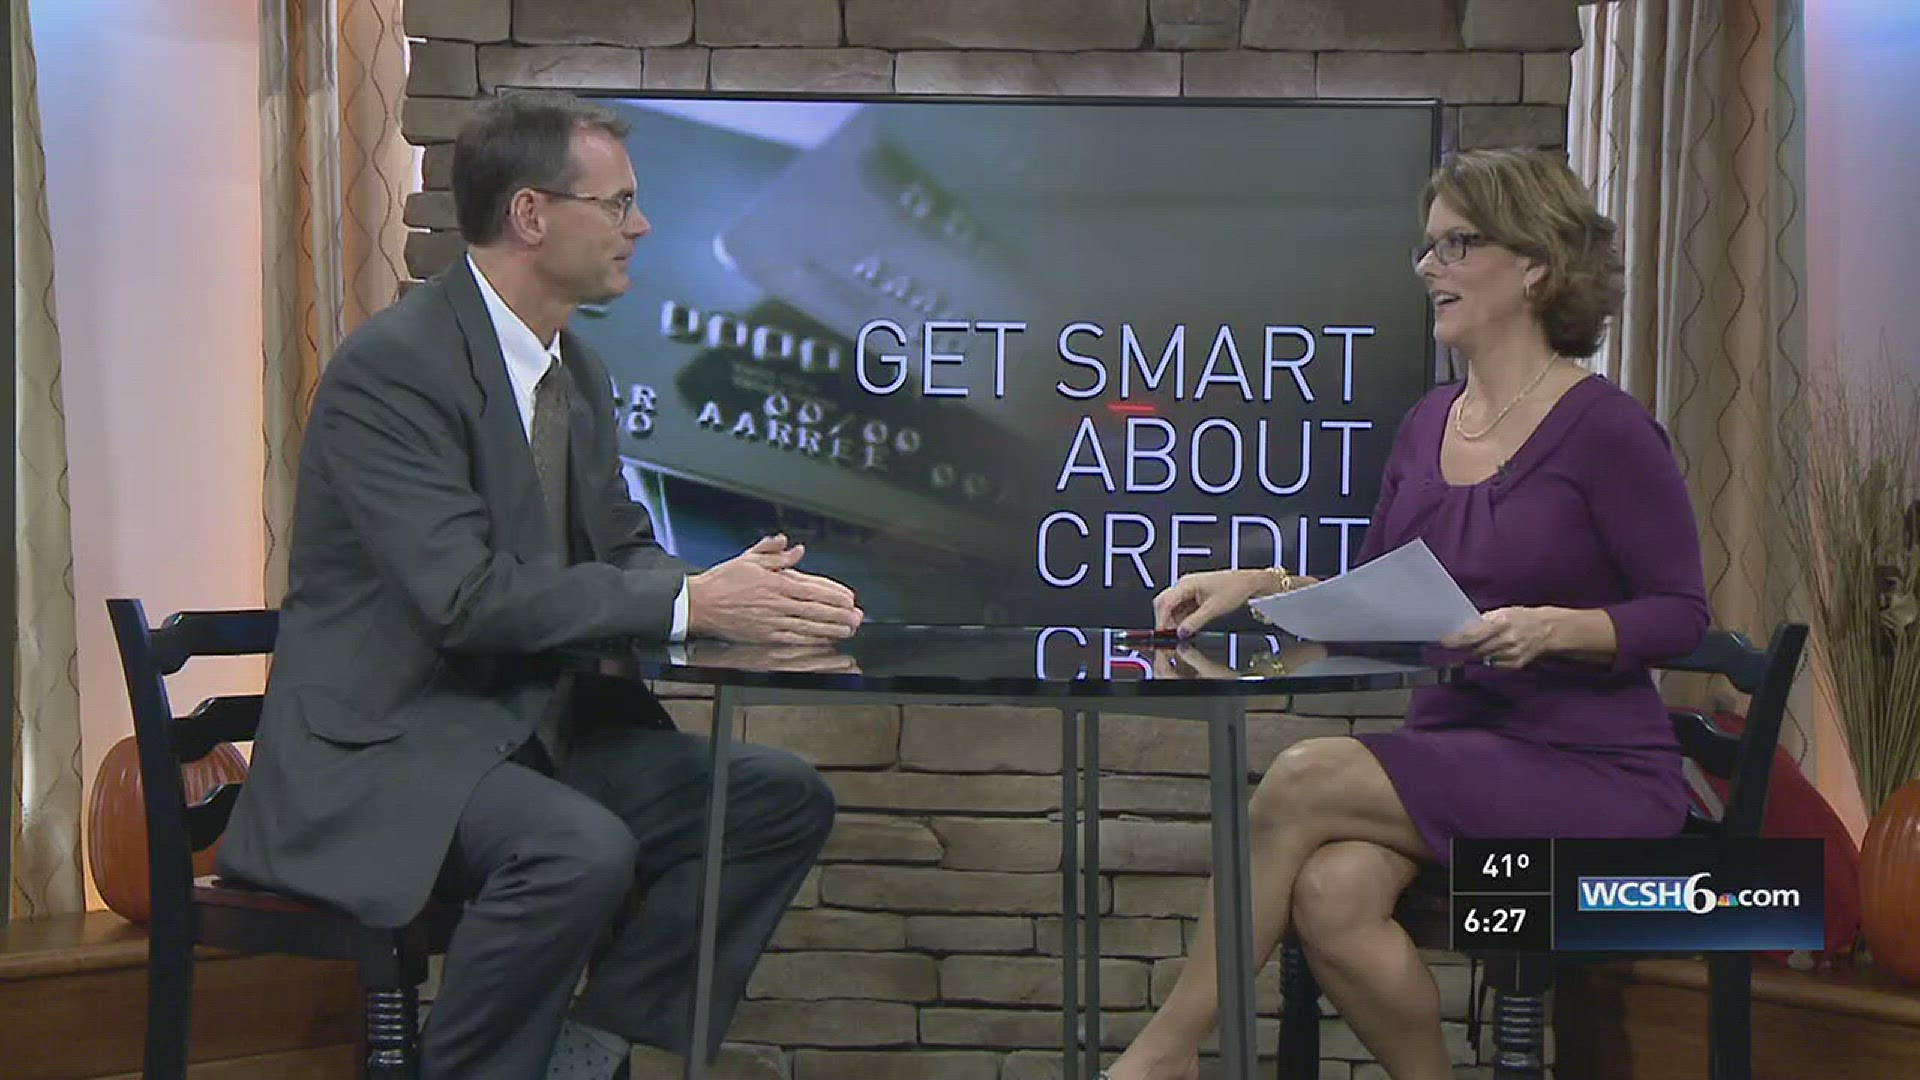 Get smart about credit